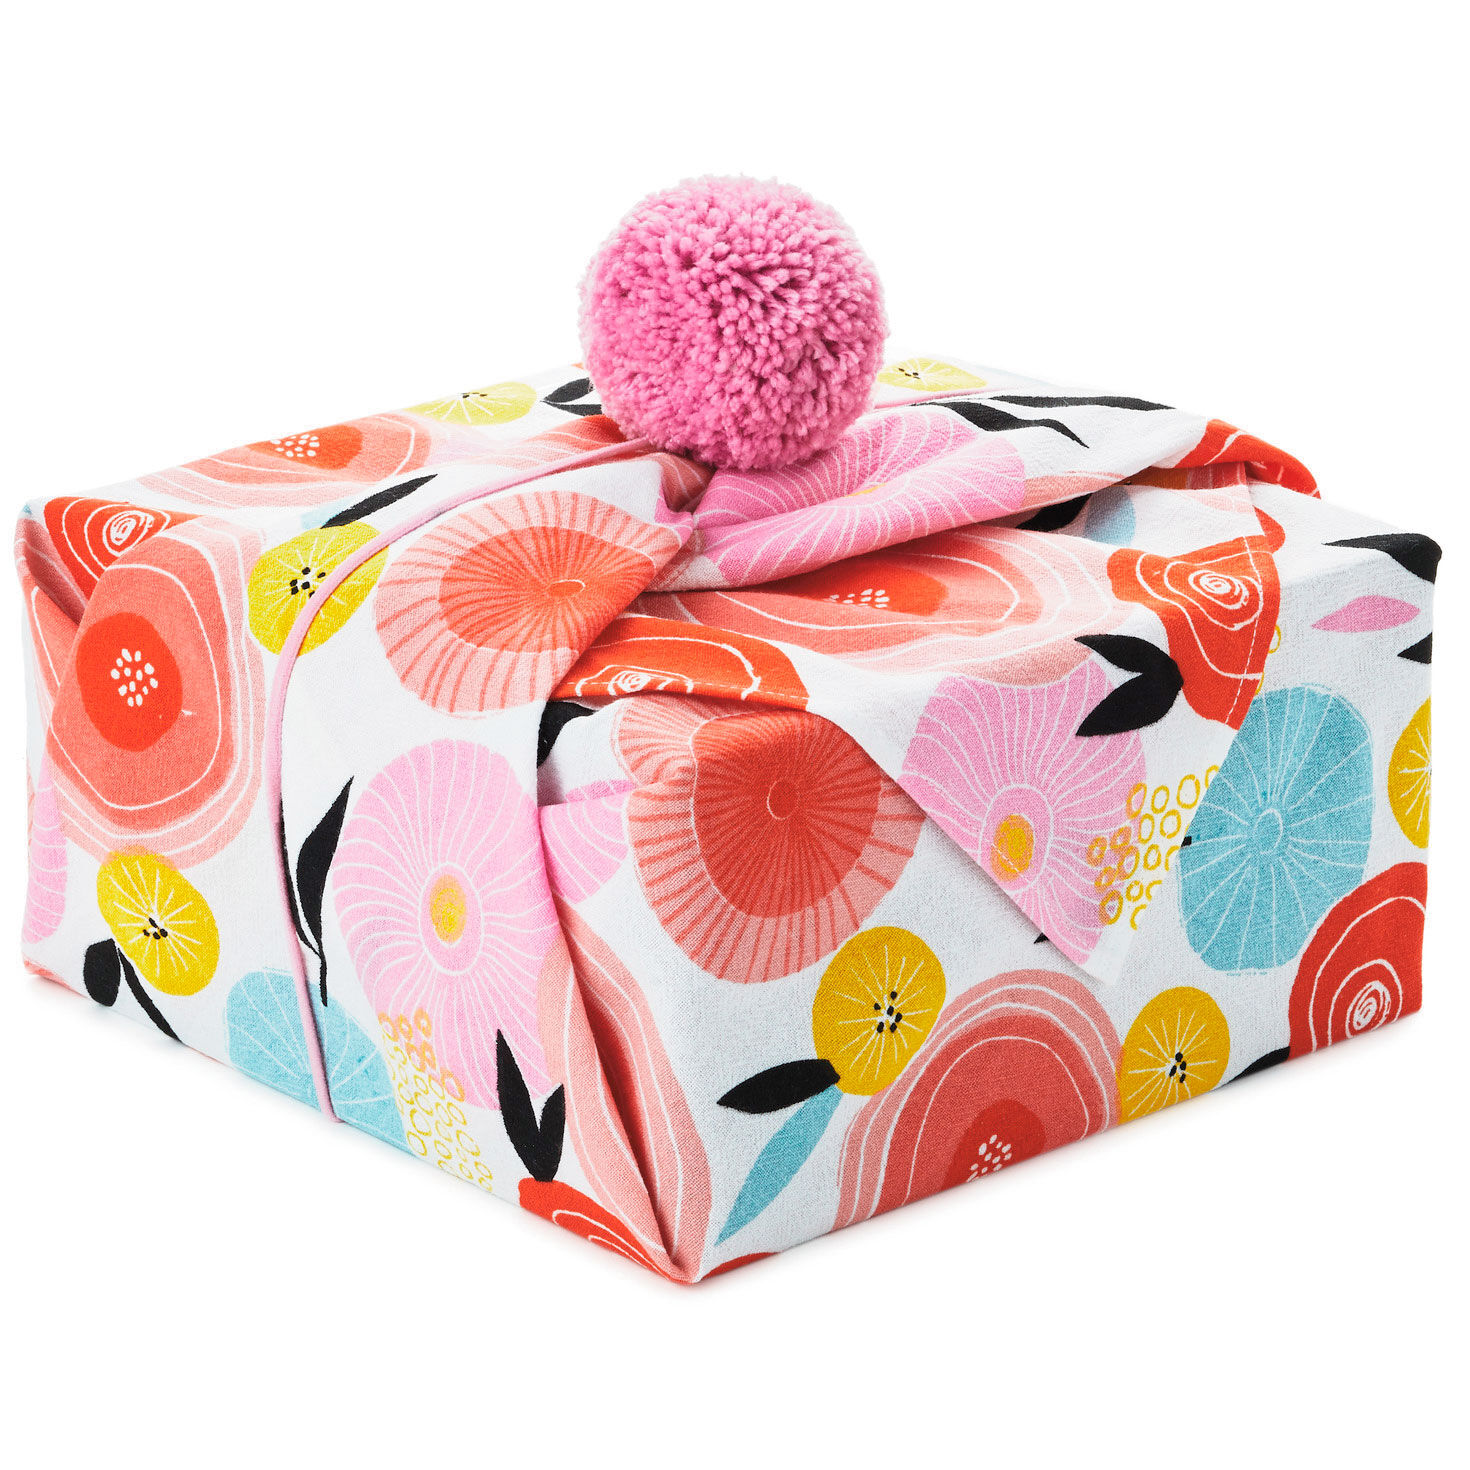 Timeless Gift Wrap Collection - Gift Bags - Hallmark